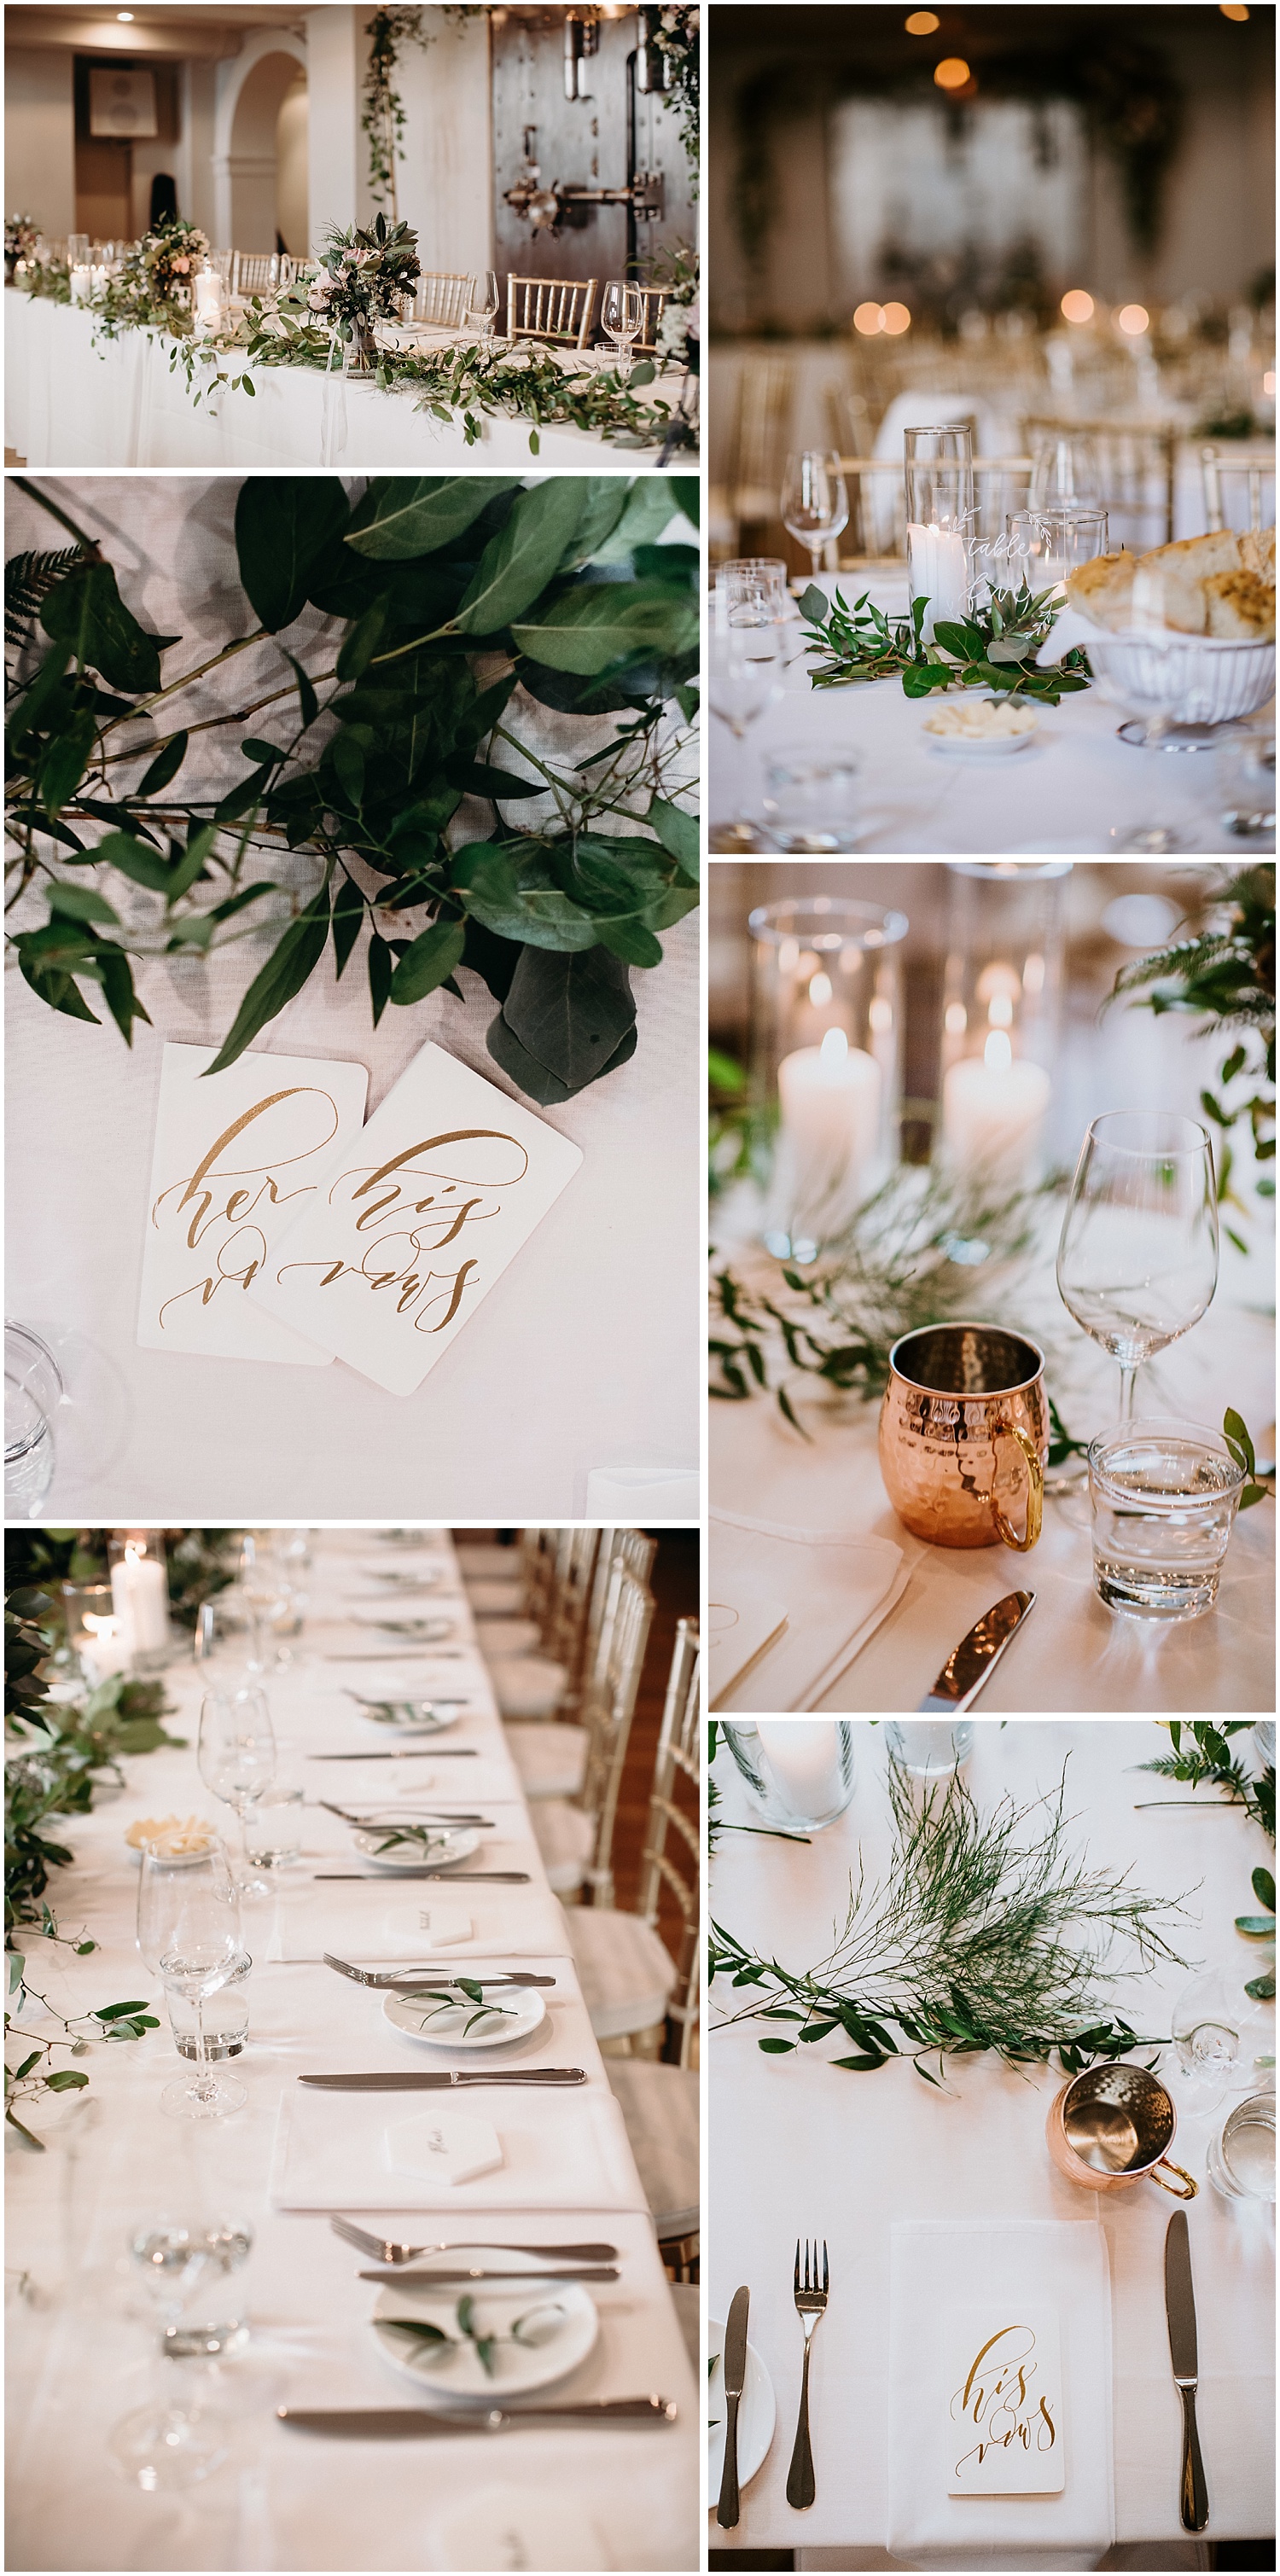 The Permanent rustic chic wedding reception details with gold accents